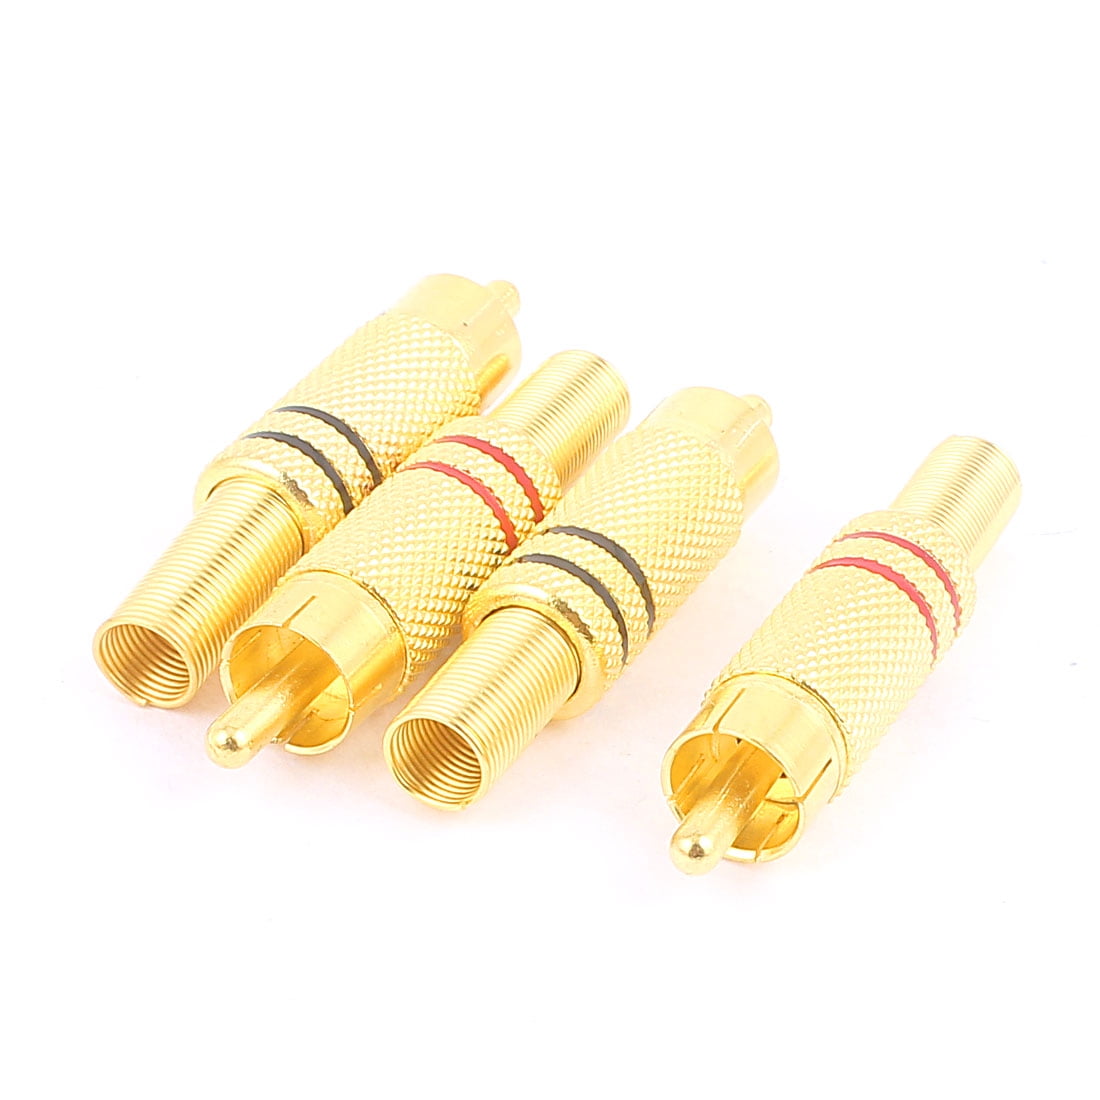 Hot HU11 RCA Male Plug Solder Free Gold Audio Video Adapter Connector Wholesale